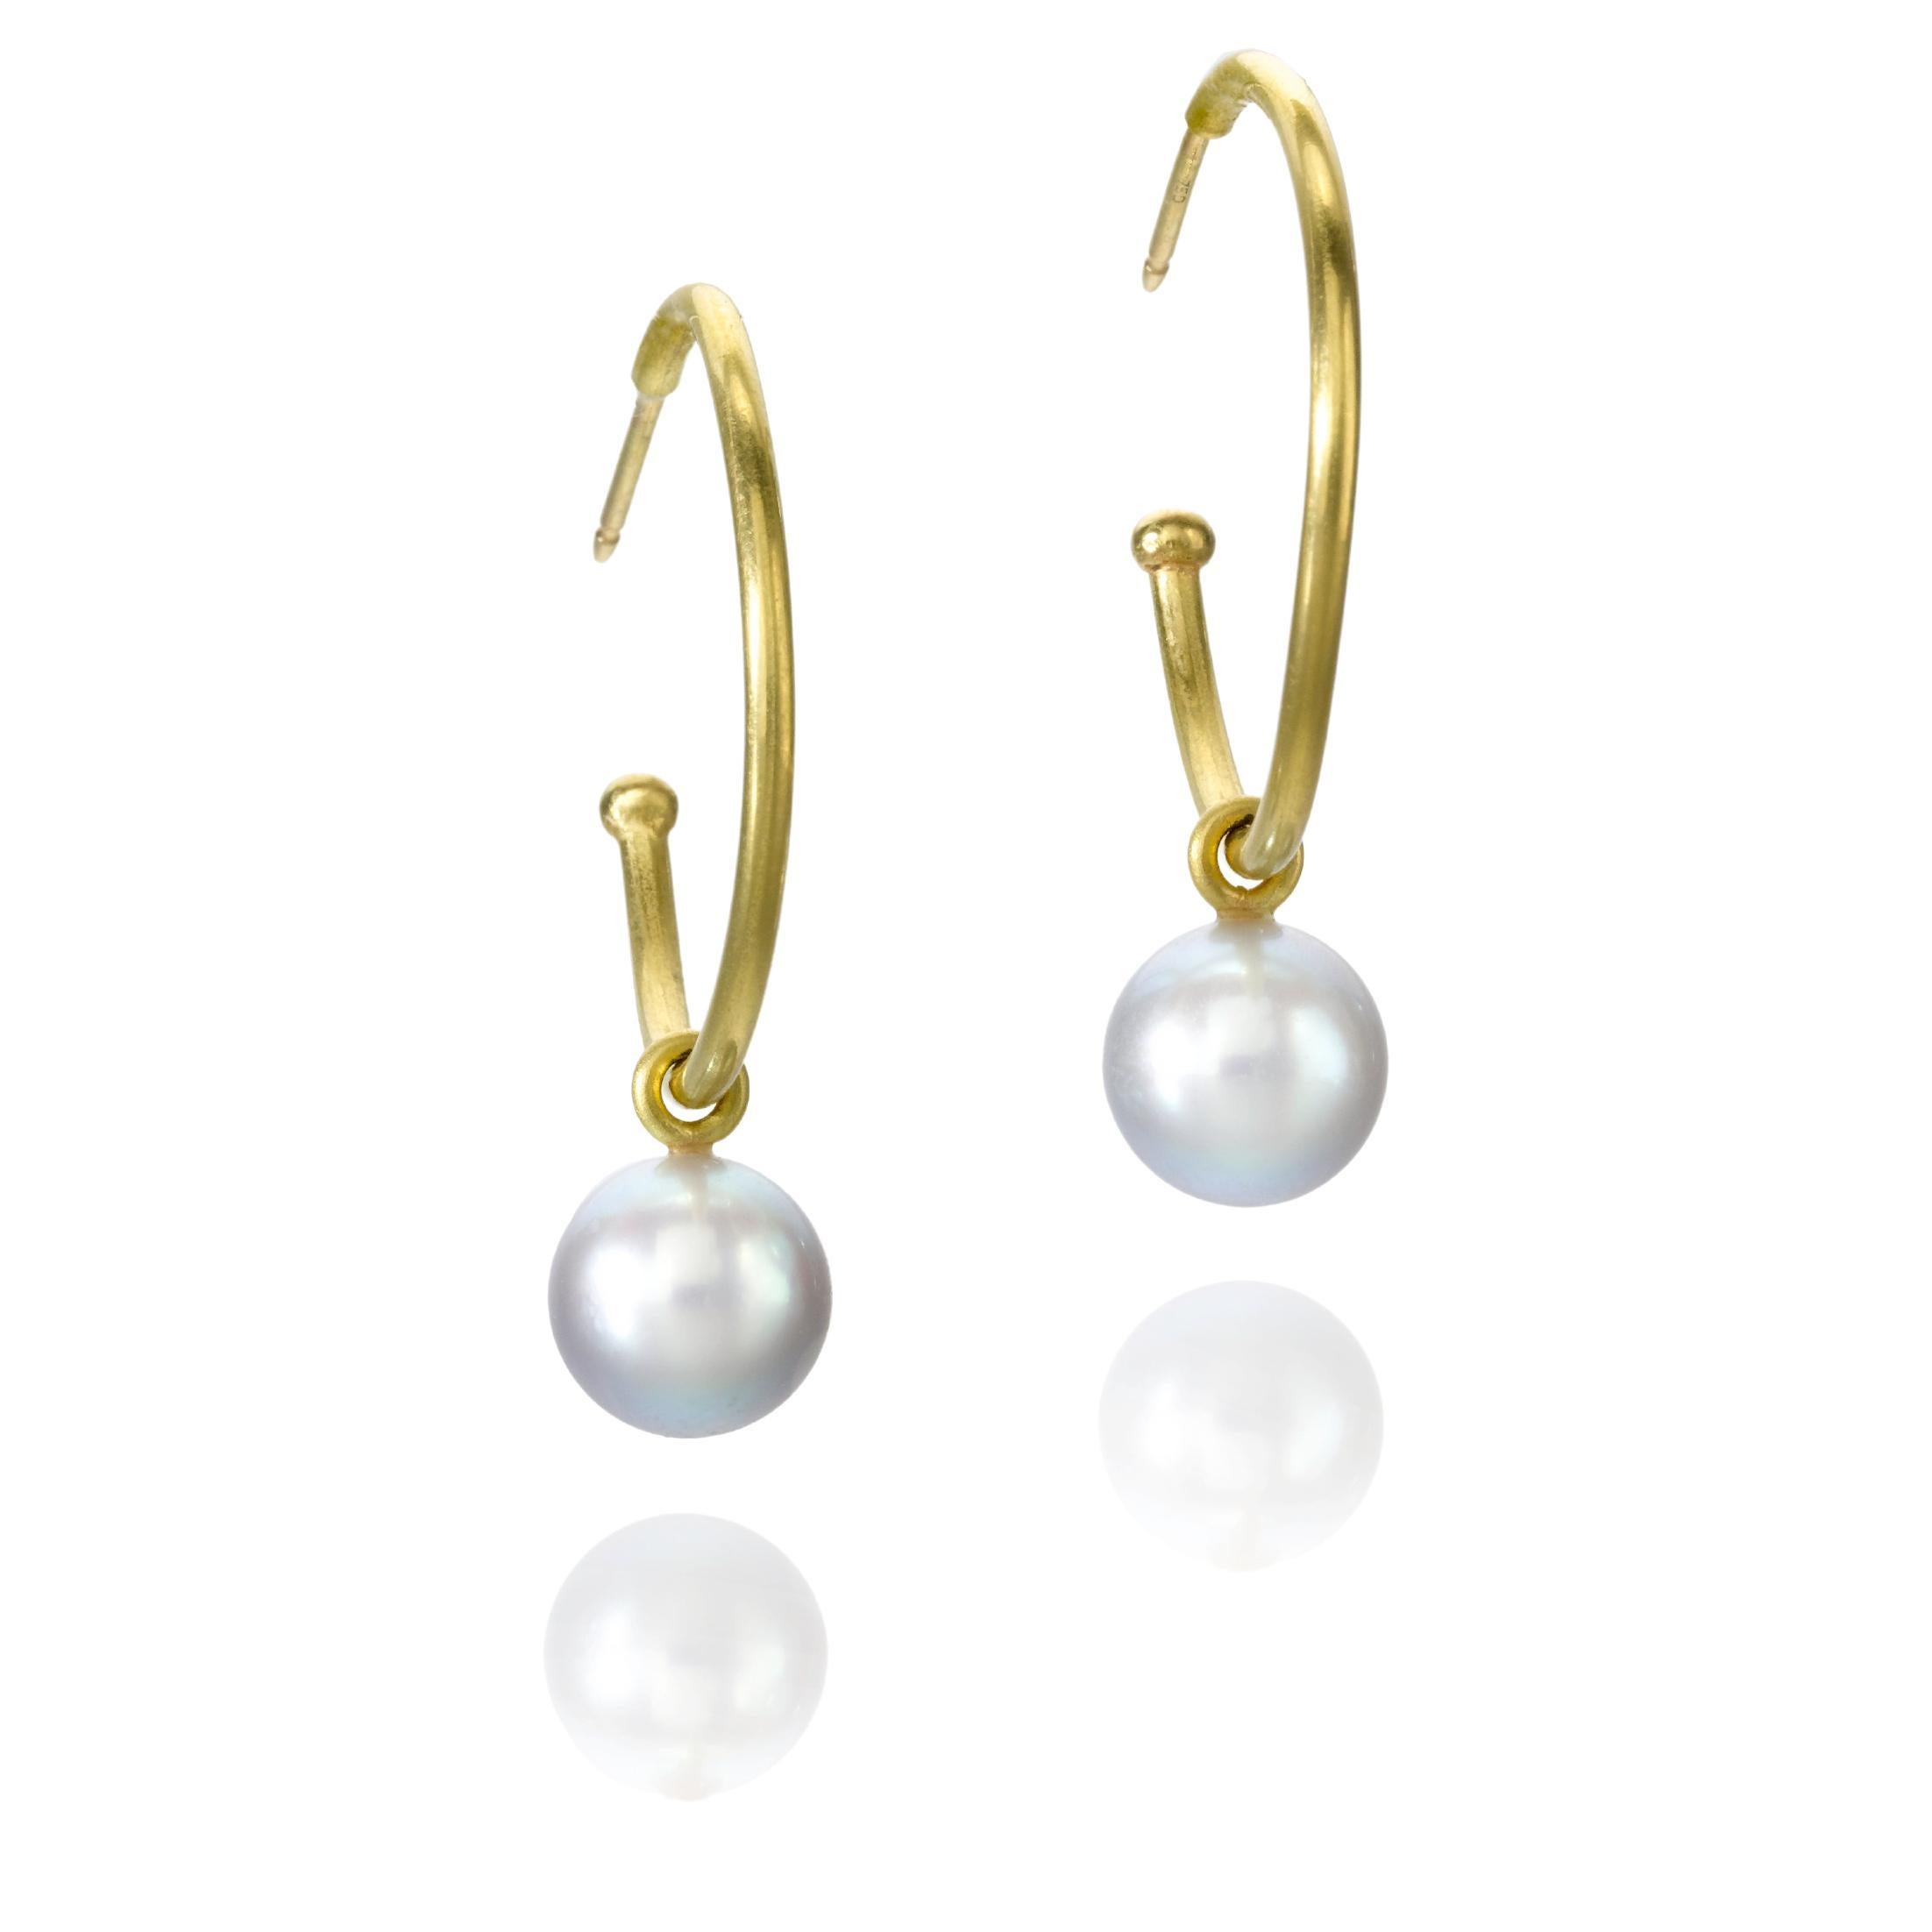 Large 20 Karat hoops with South Sea white Pearls